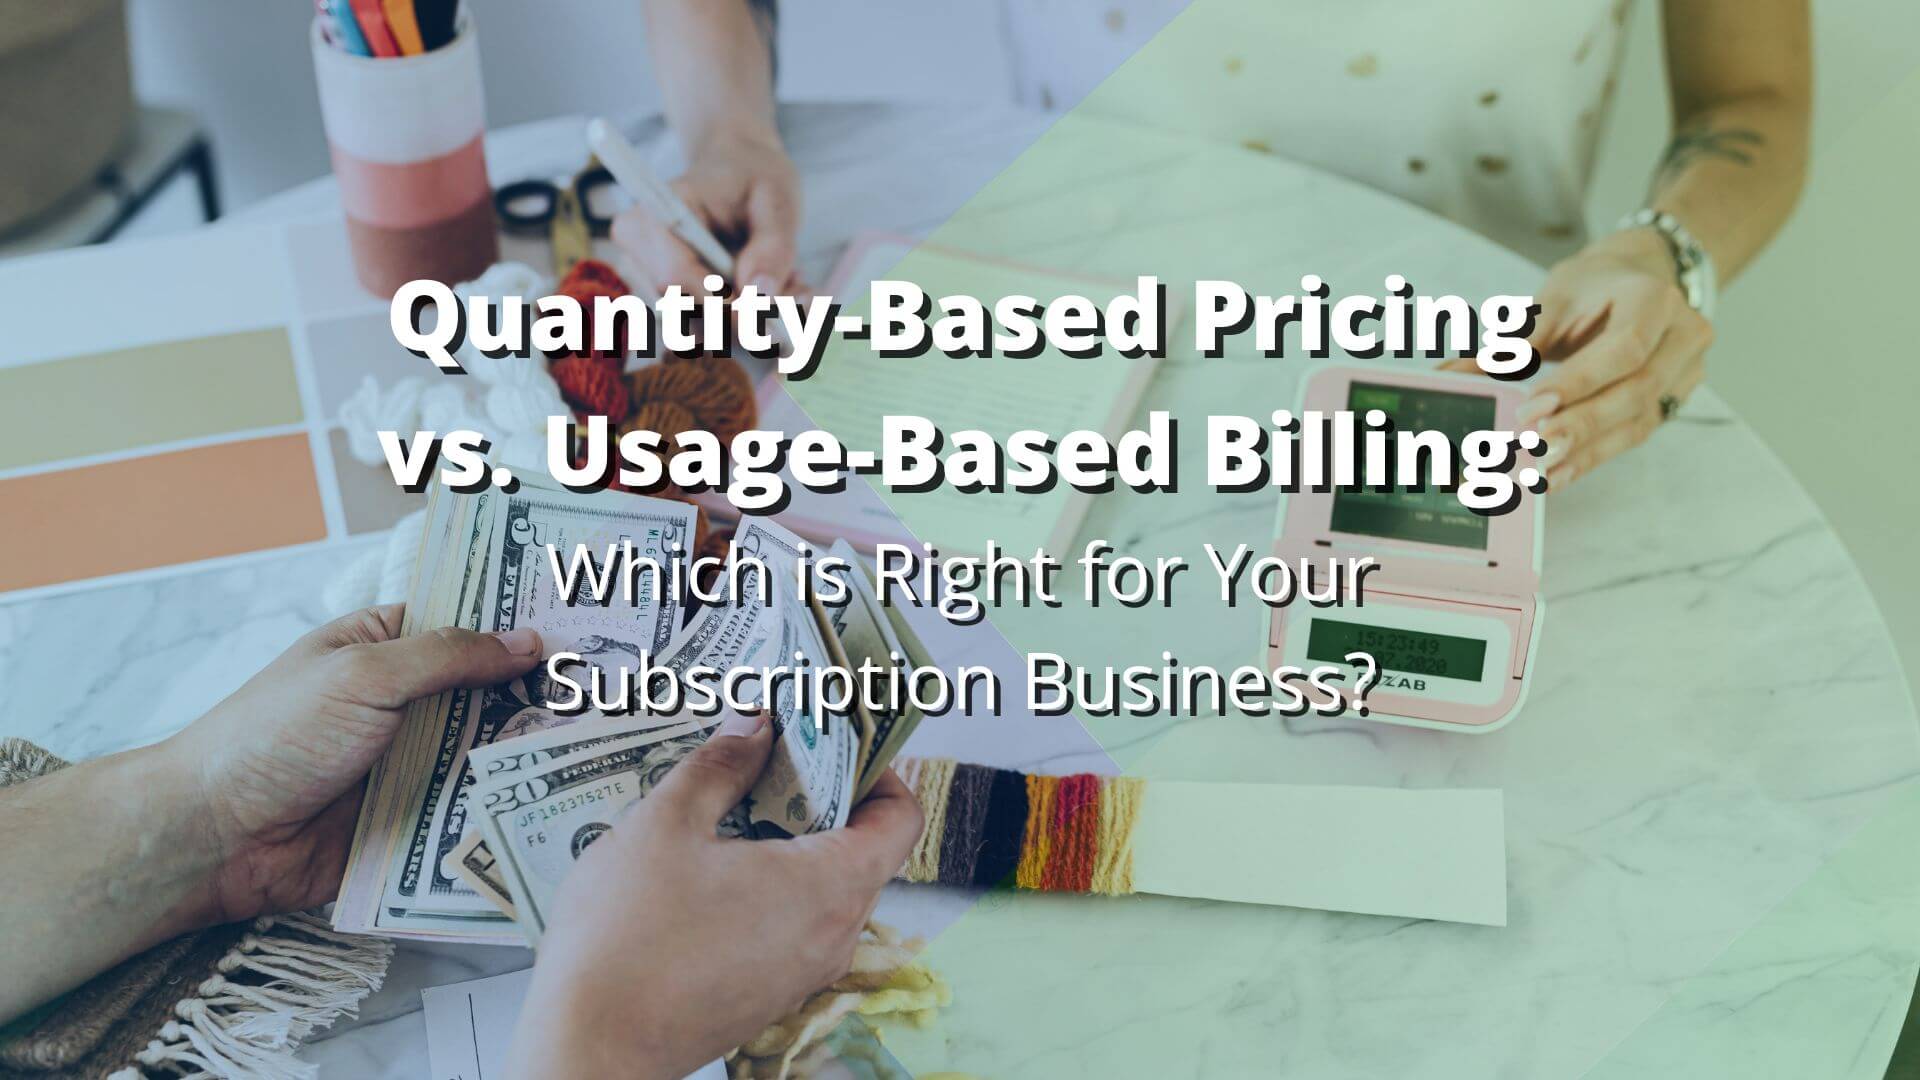 Quantity-Based Pricing vs Usage-Based Billing, which is right for your business? Here are the differences to help you figure it out.